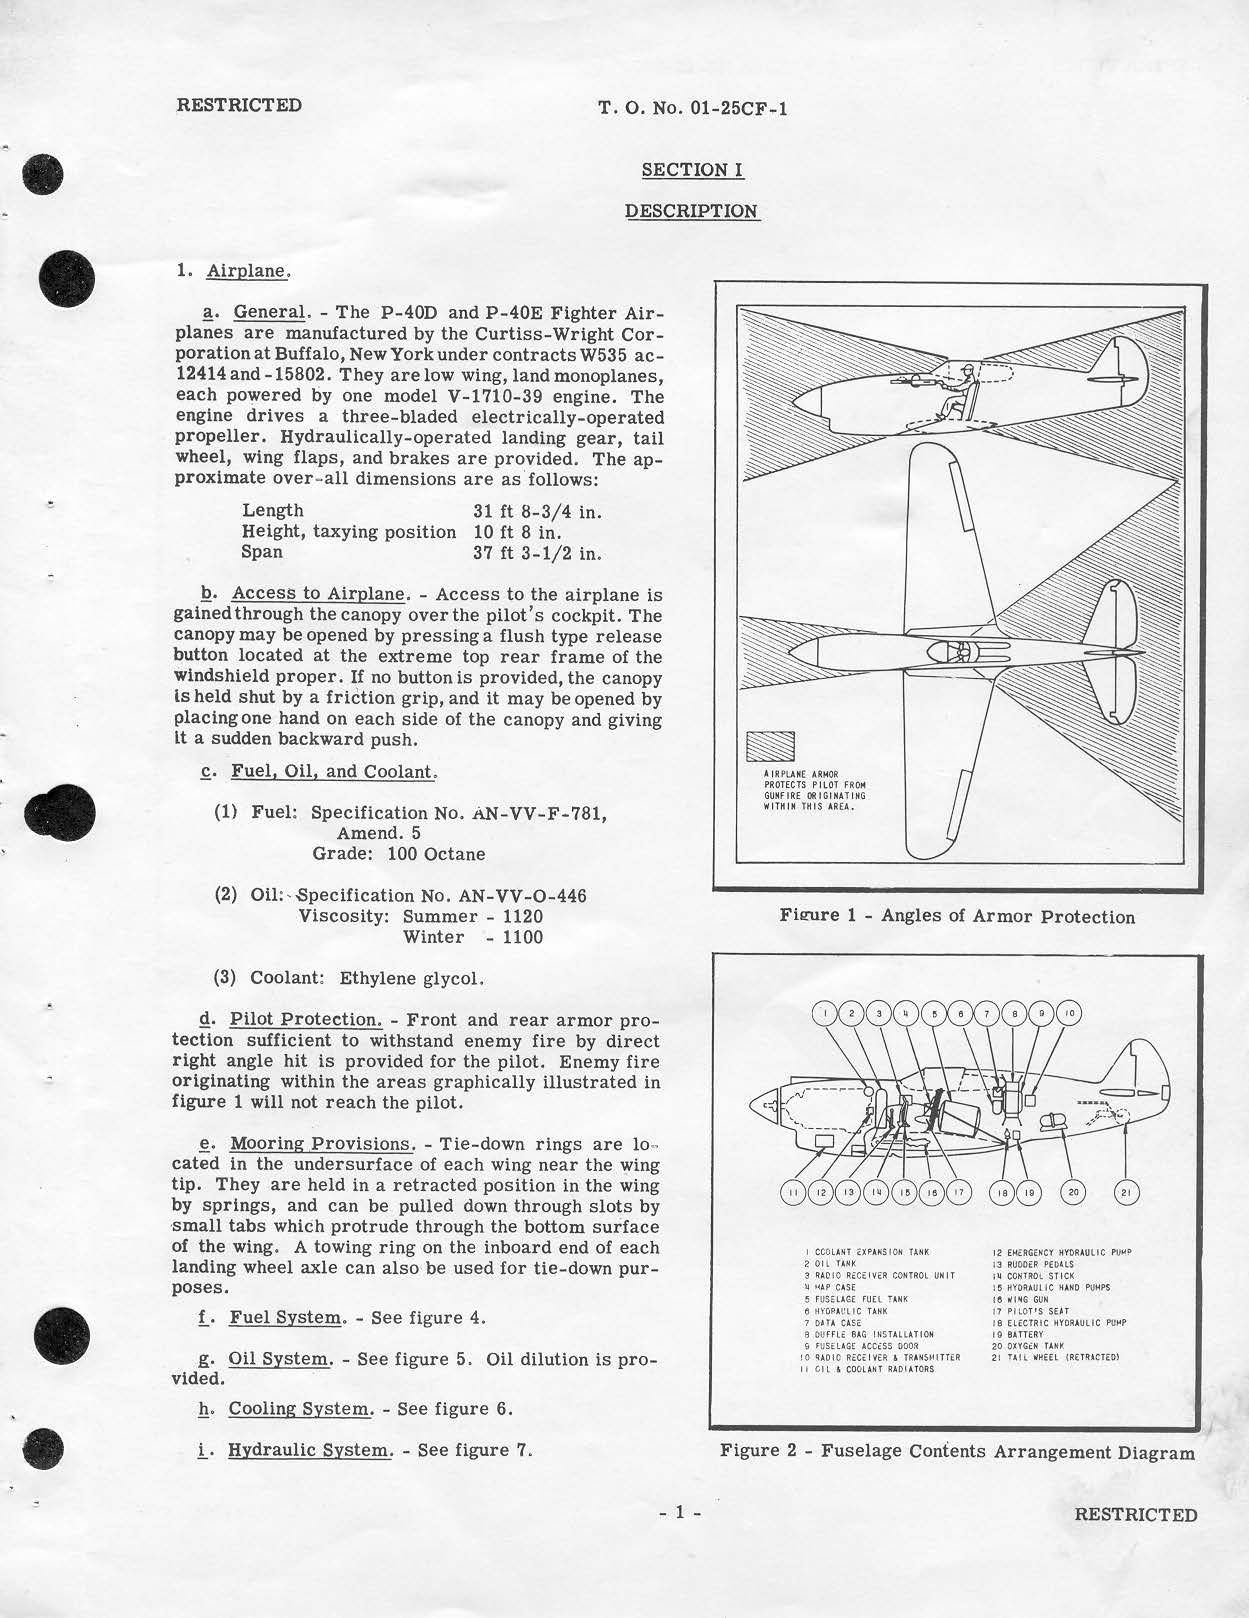 Sample page 5 from AirCorps Library document: Pilot's Flight Operating Instructions for P-40D and P-40E